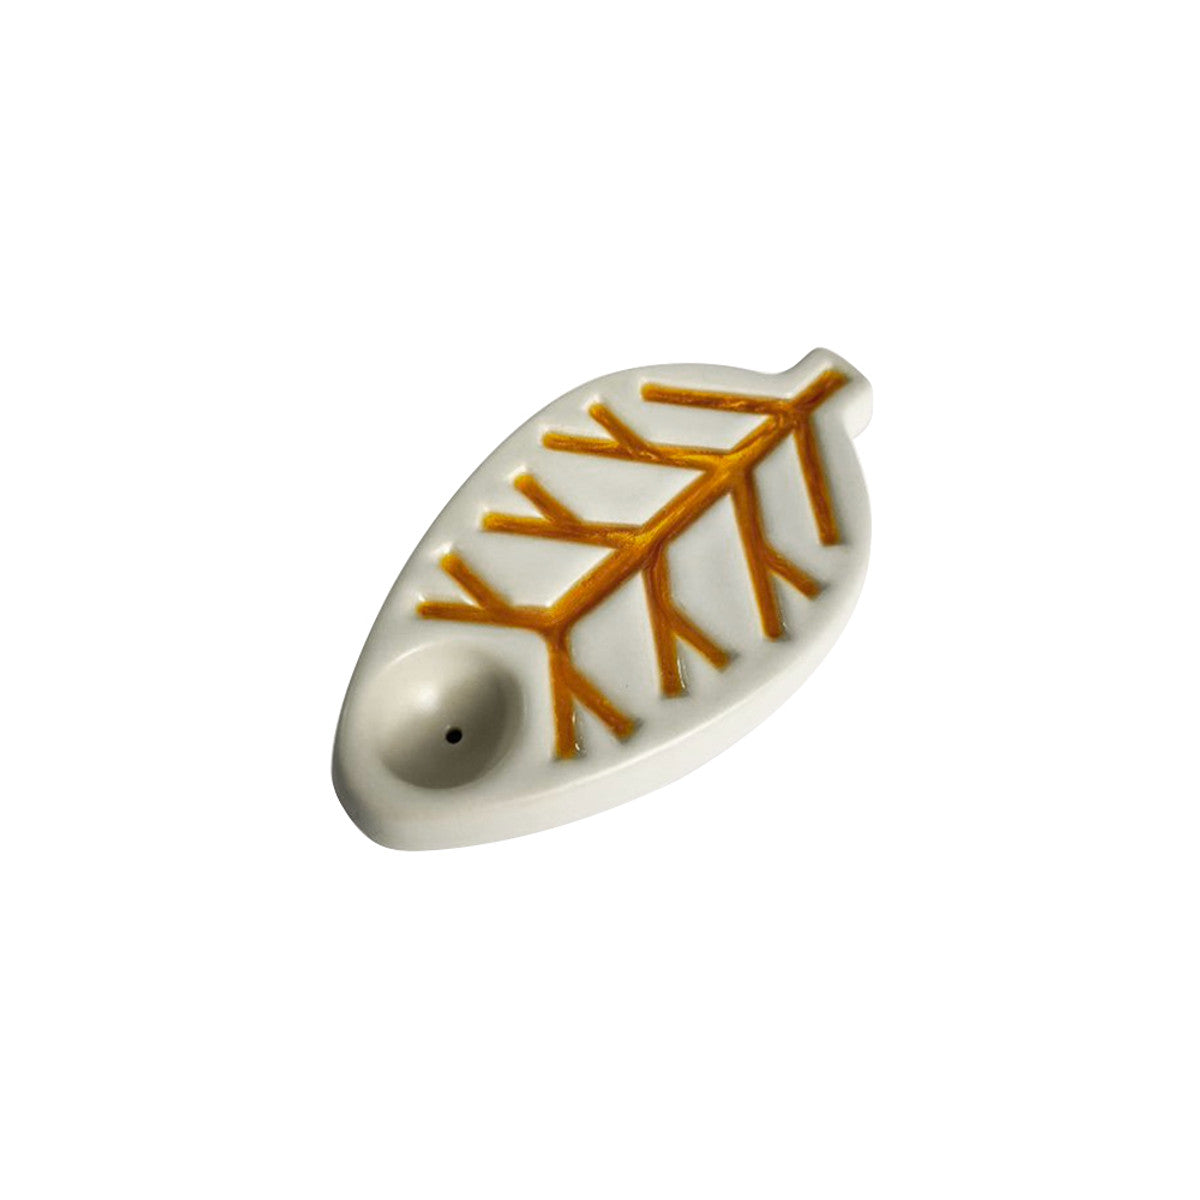 Oak and Earth Ceramic Leaf Pipe, 4.5" Length, Canada Made - Top View on White Background